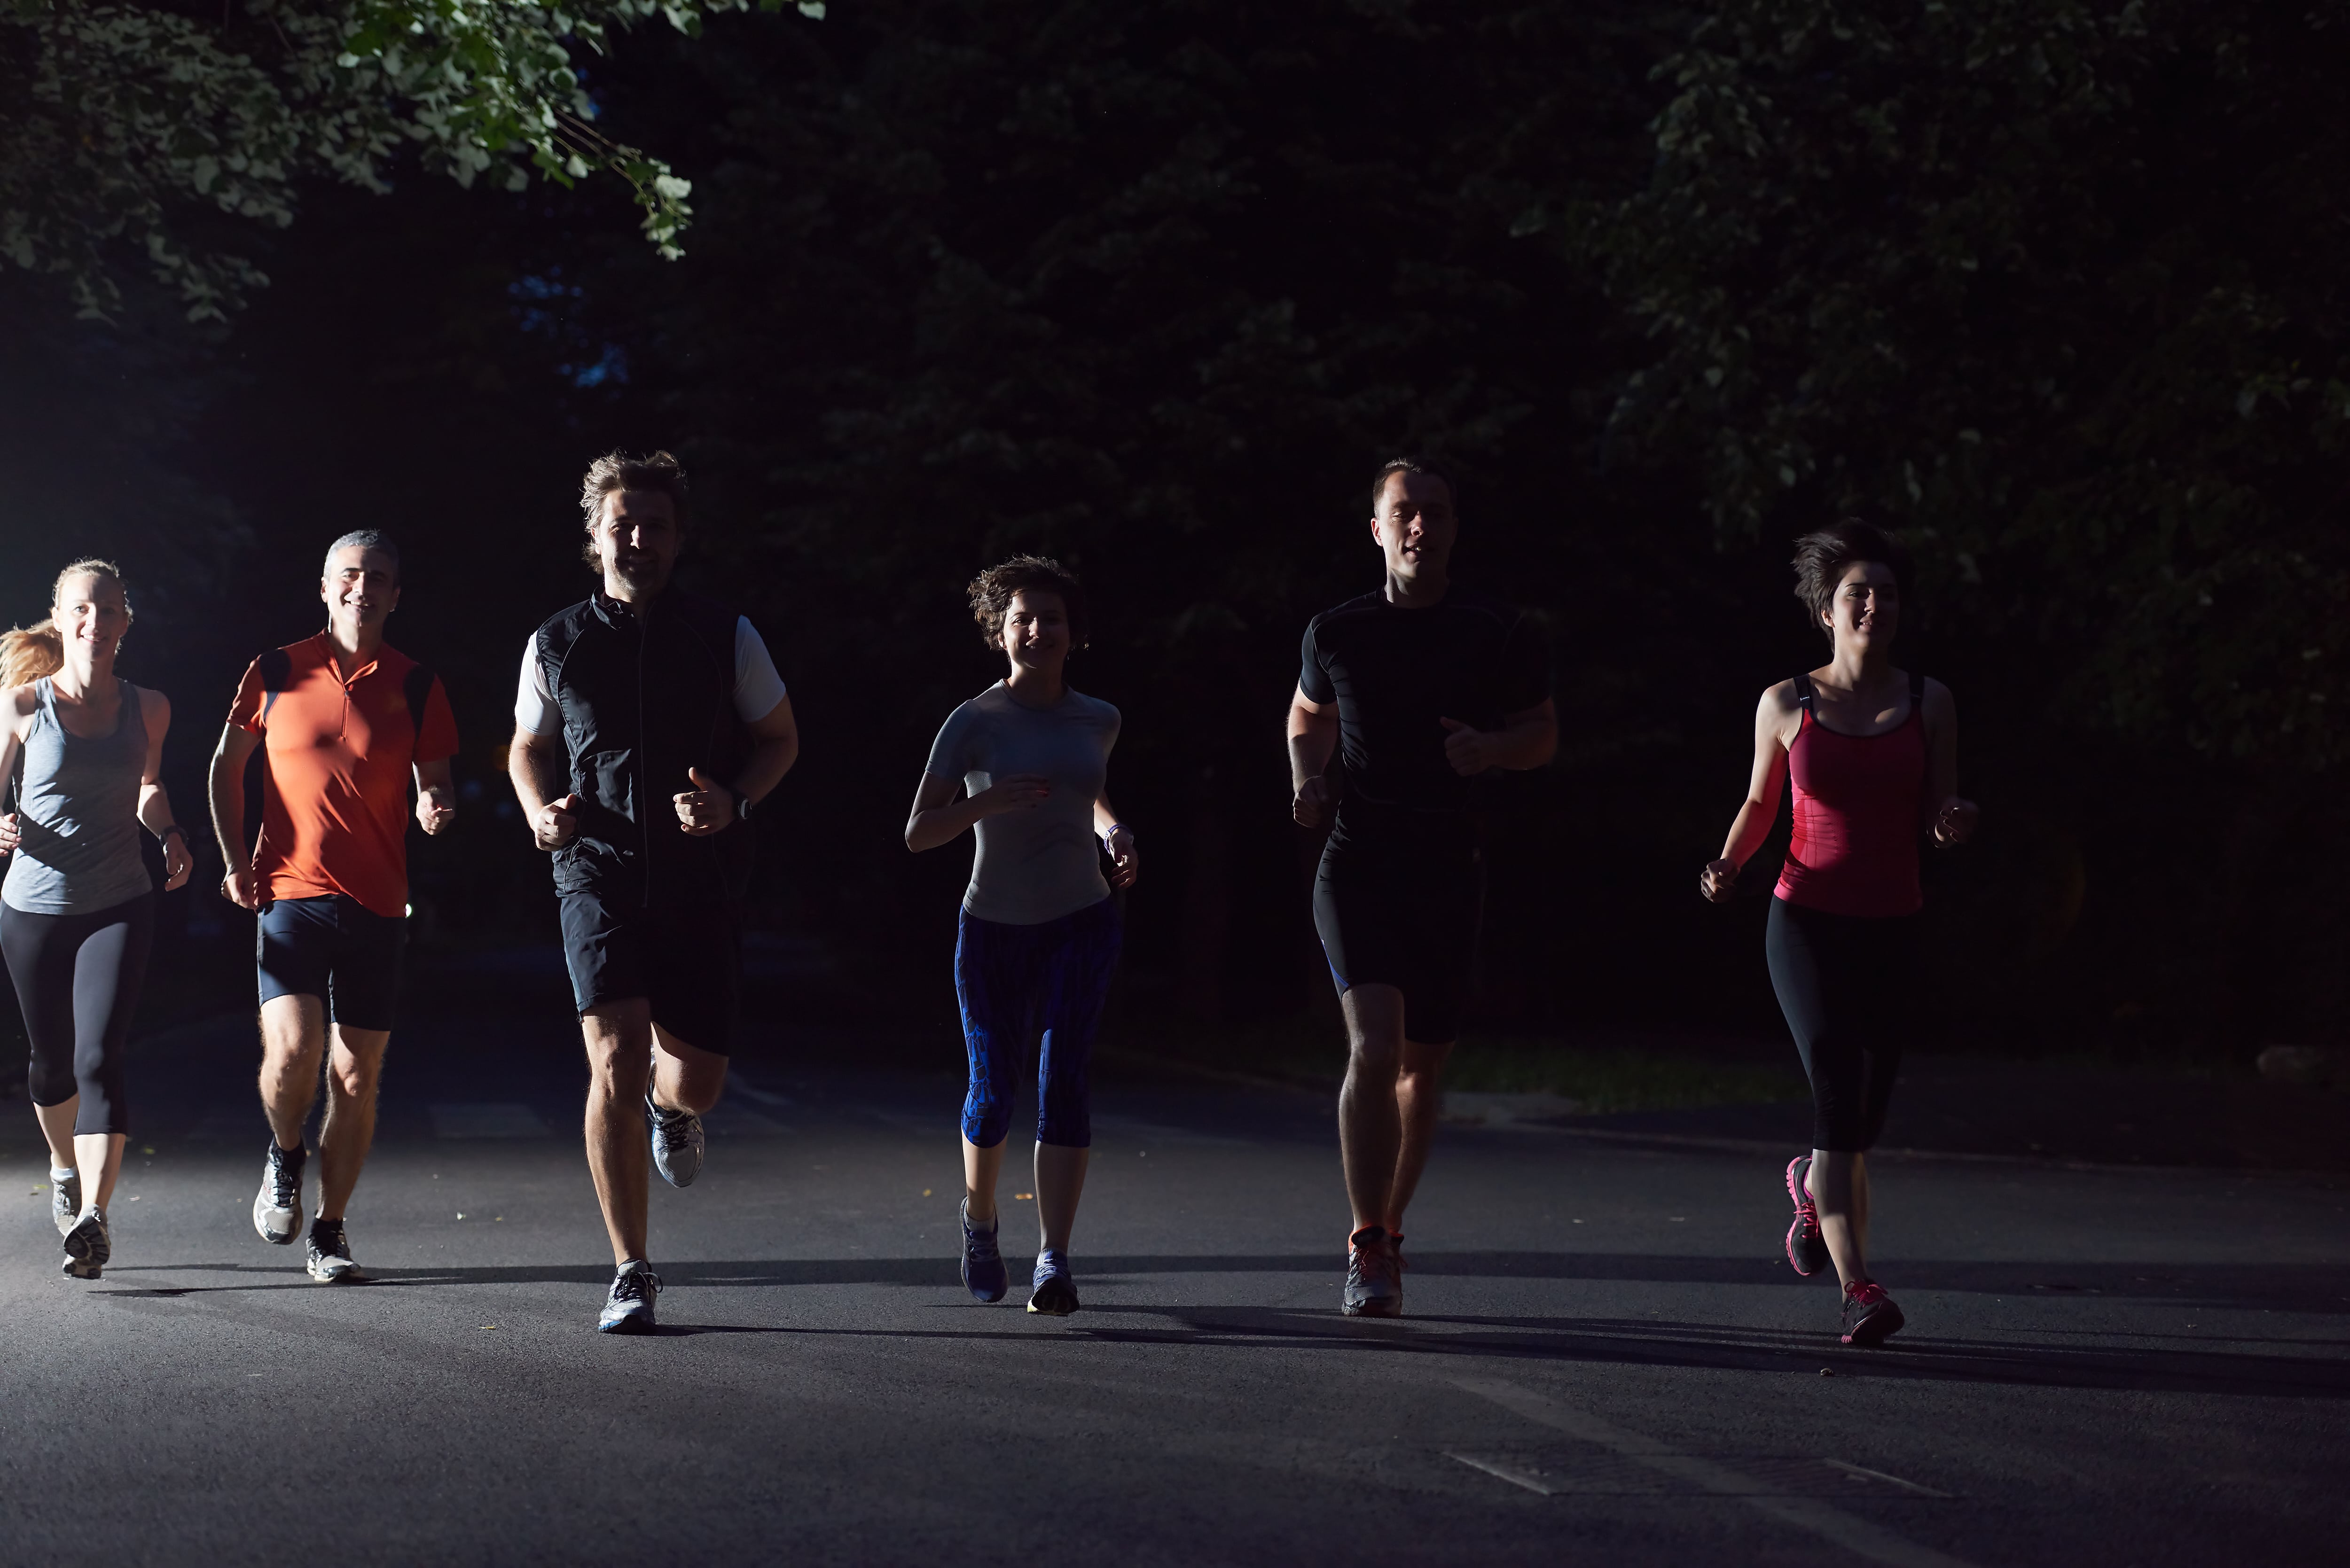 The family-friendly 20th annual Run in the Dark is set to be held on Saturday, September 14,